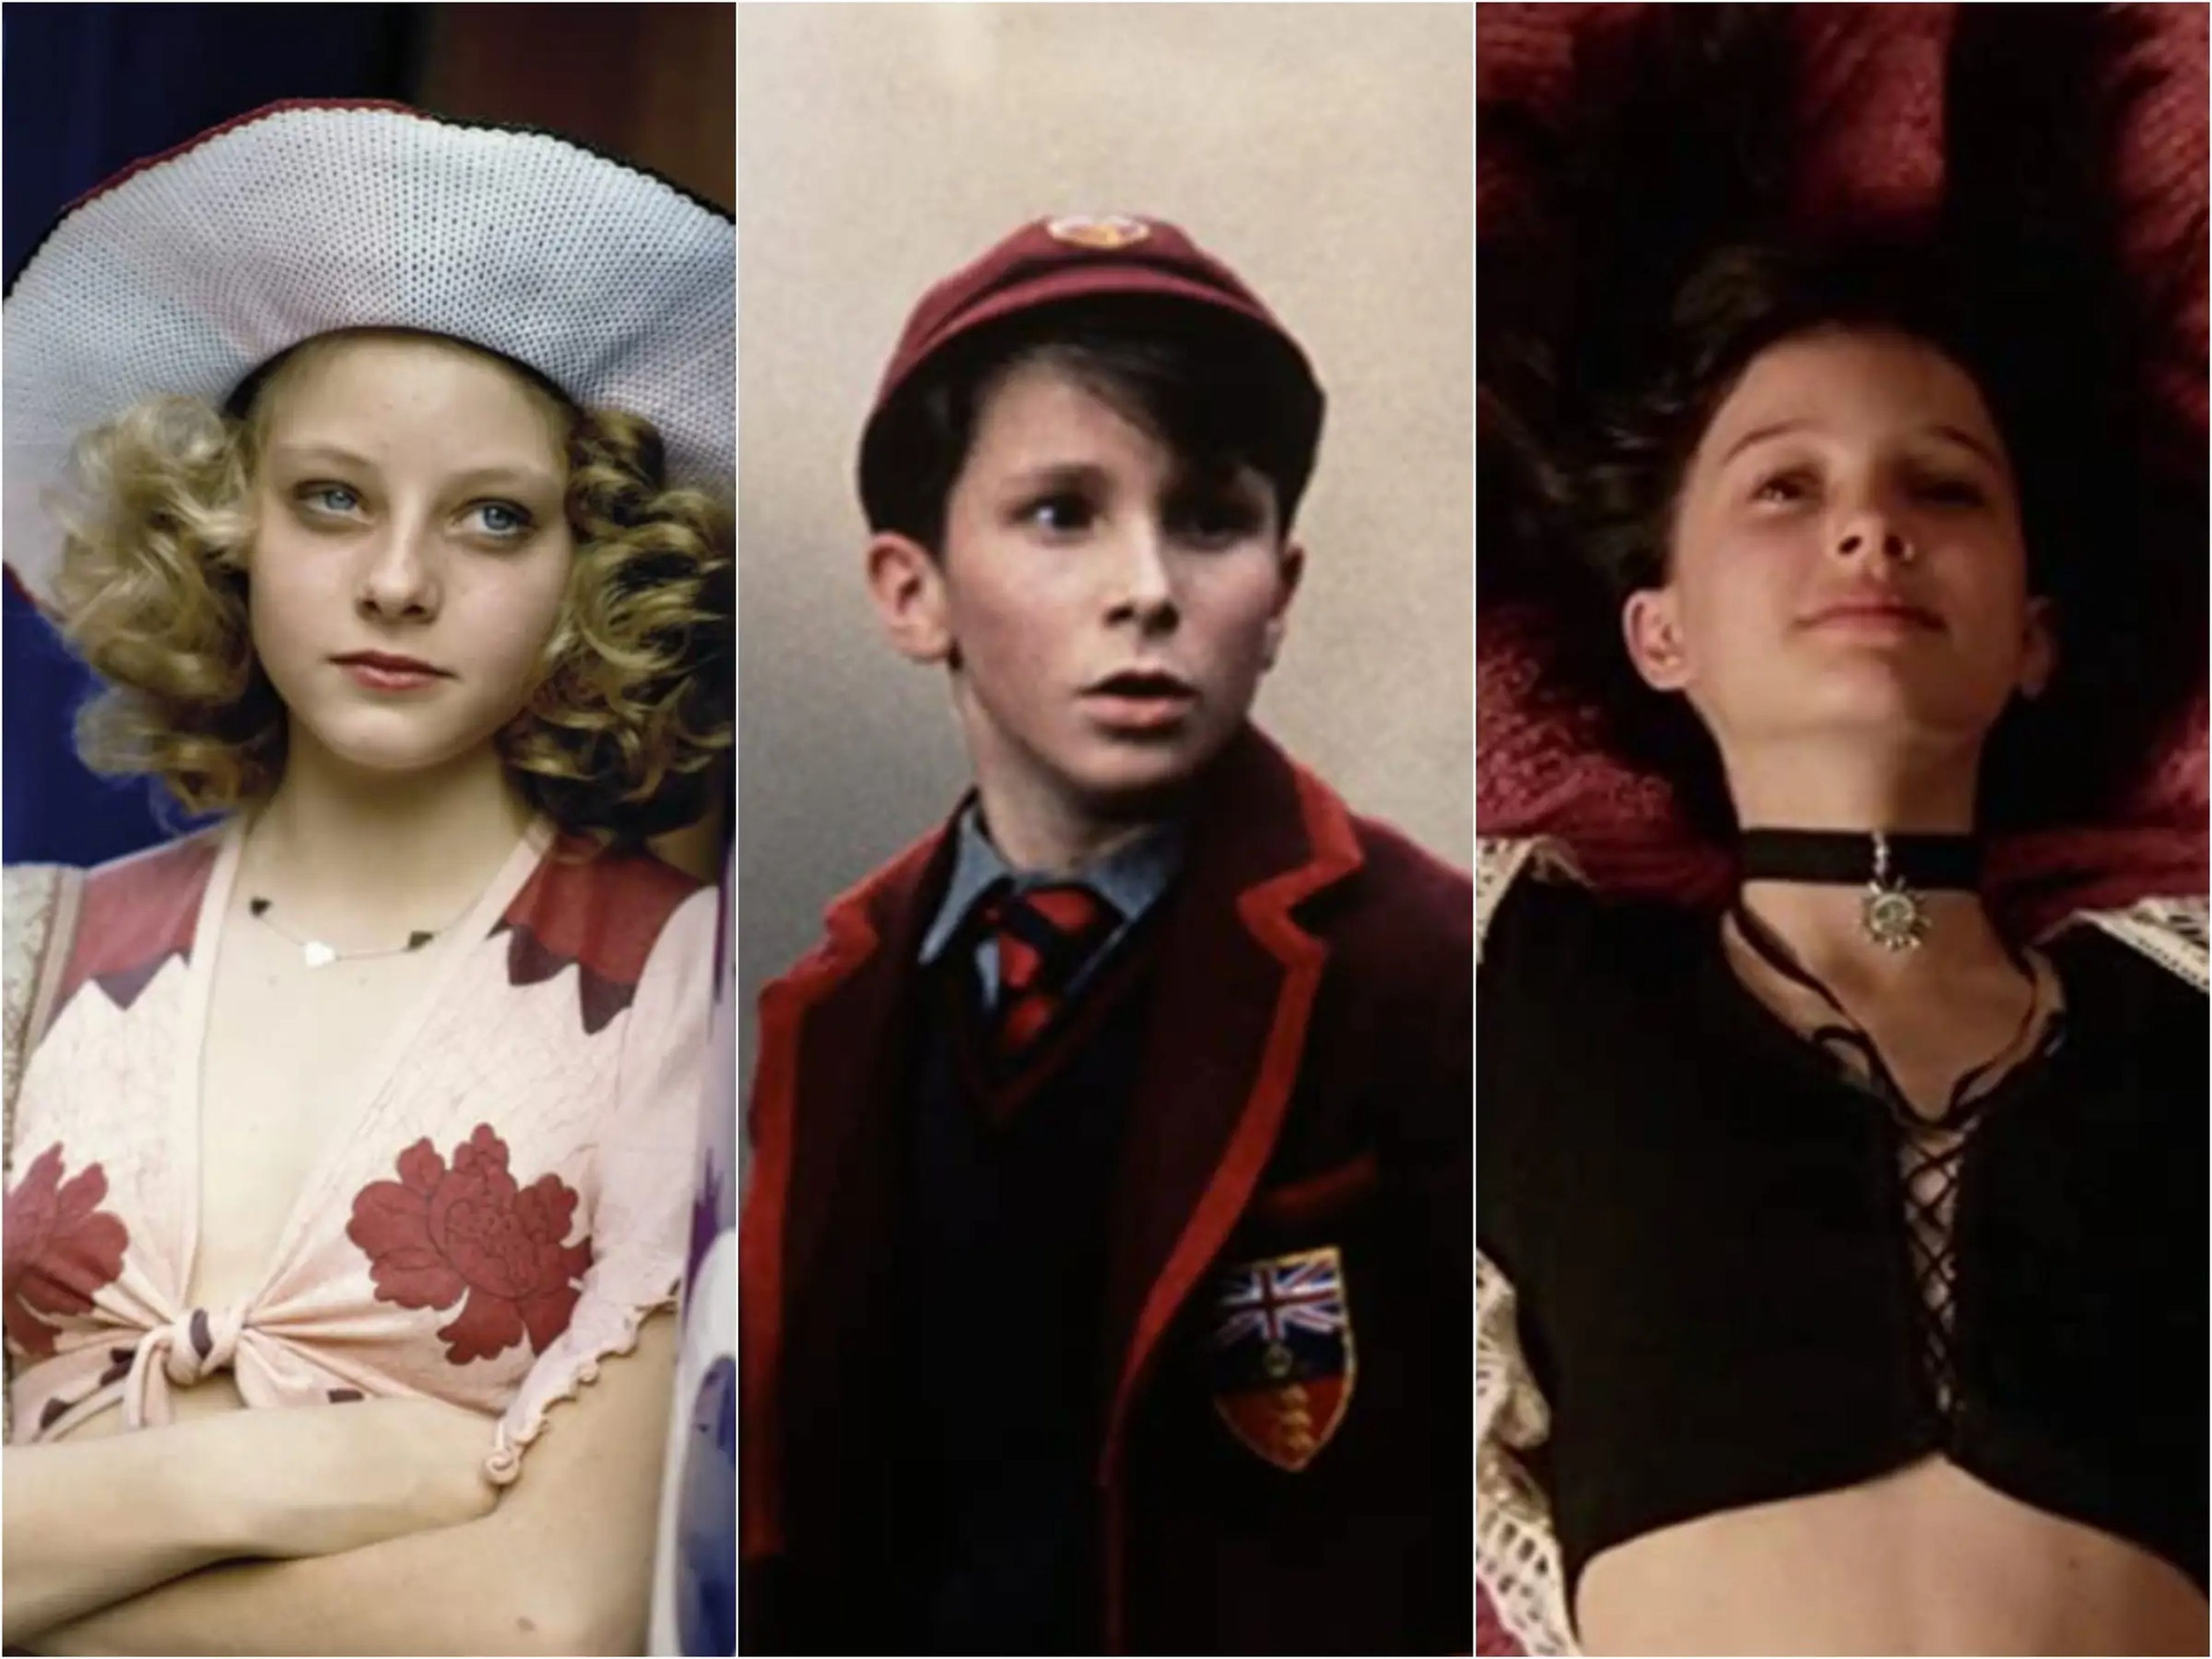 Side by side photos of a young Jodie Foster, Christian Bale, and Natalie Portman.